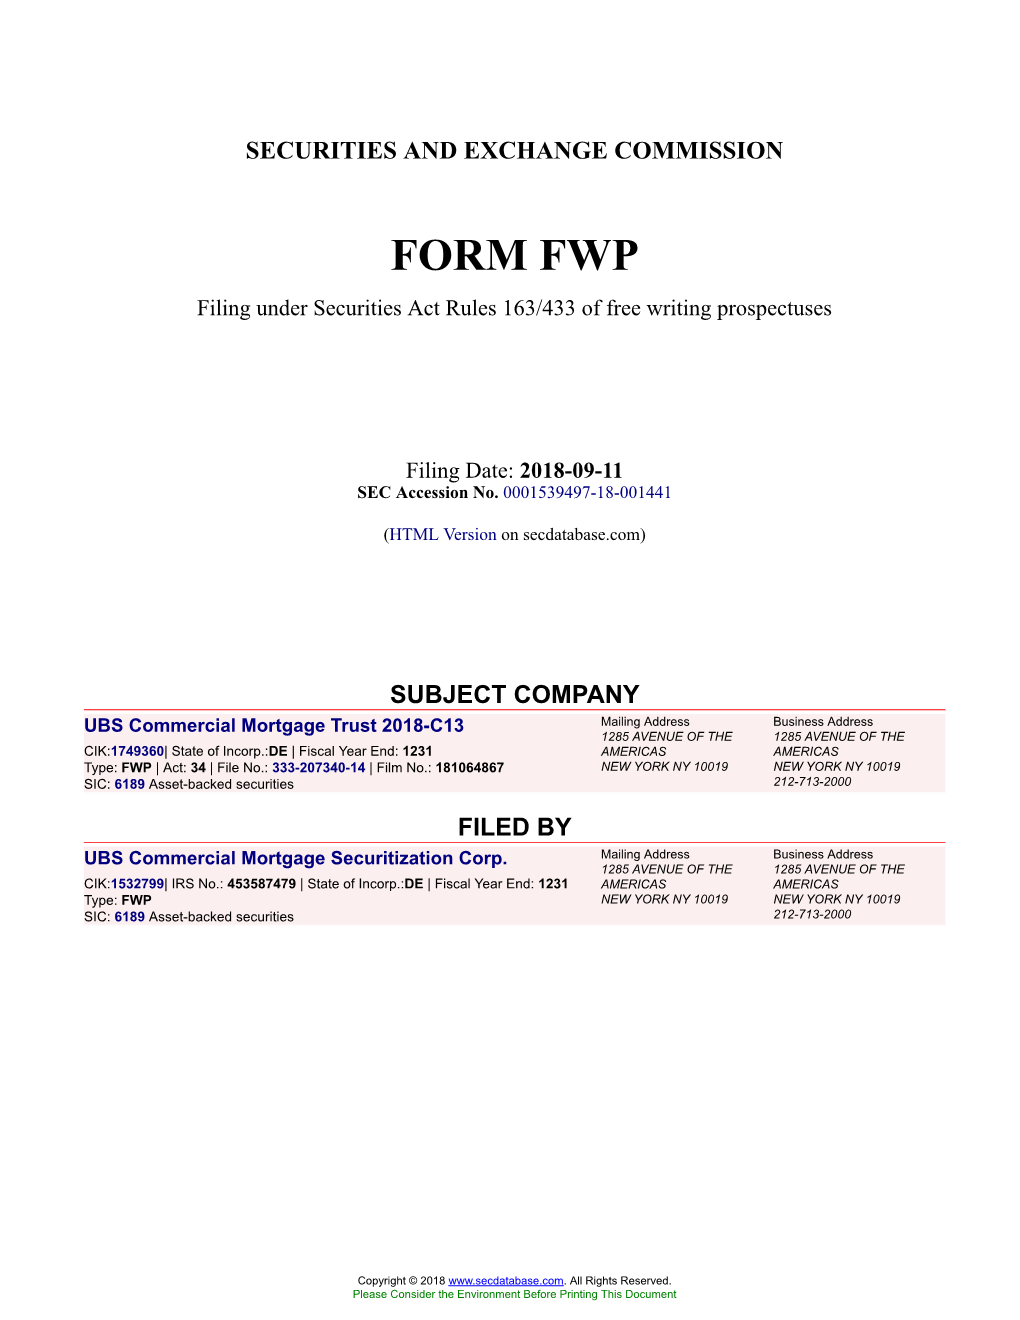 UBS Commercial Mortgage Trust 2018-C13 Form FWP Filed 2018